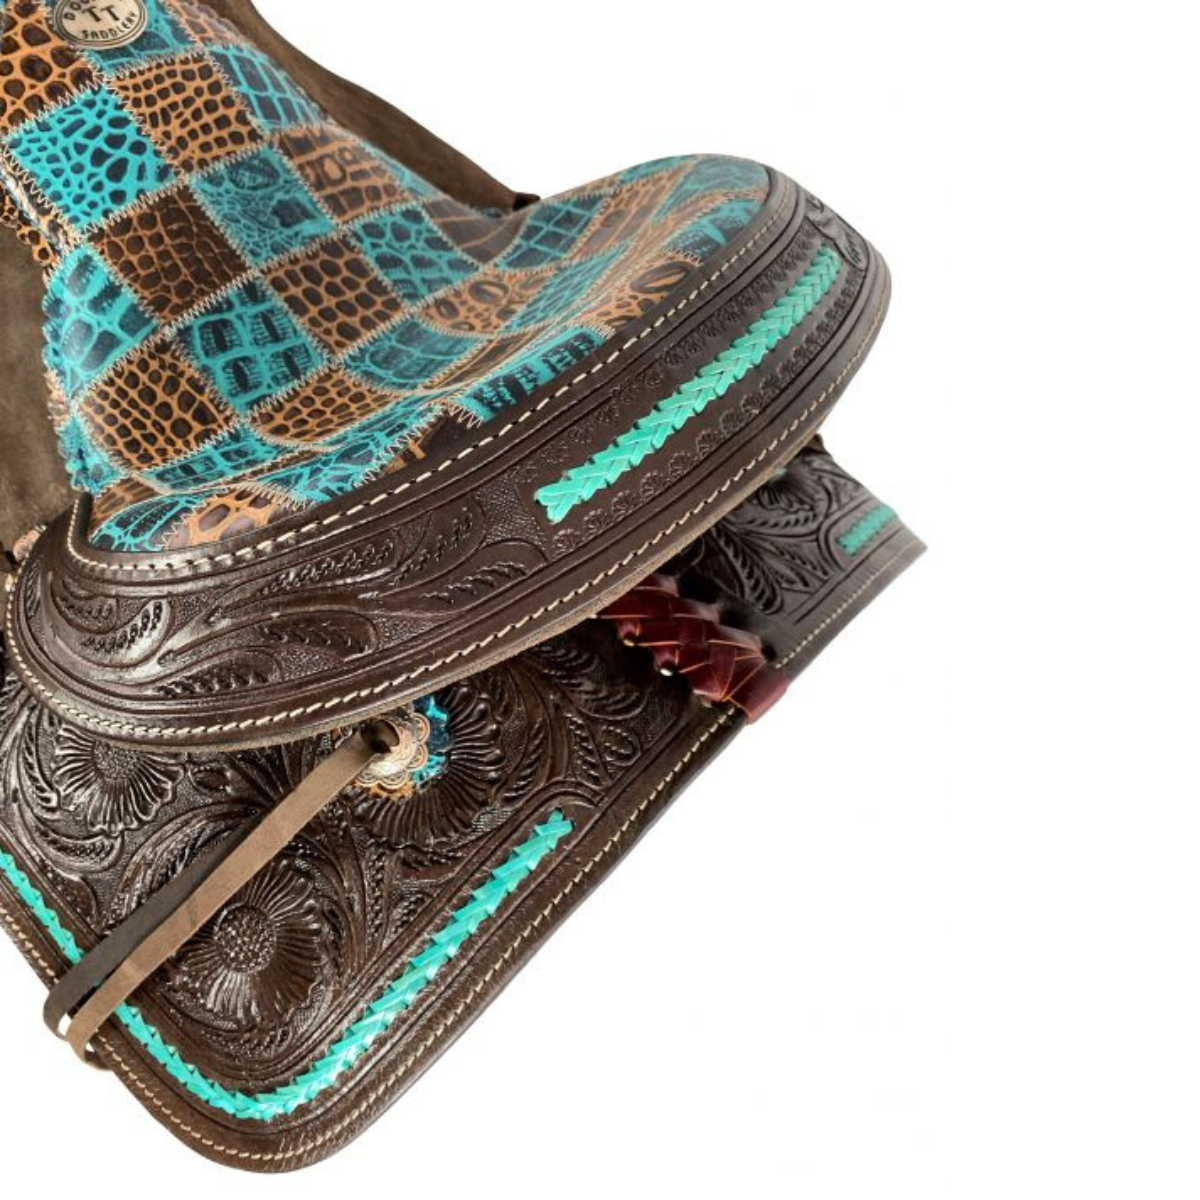 12" Double T  Barrel style saddle with teal gator patchwork pattern - Double T Saddles